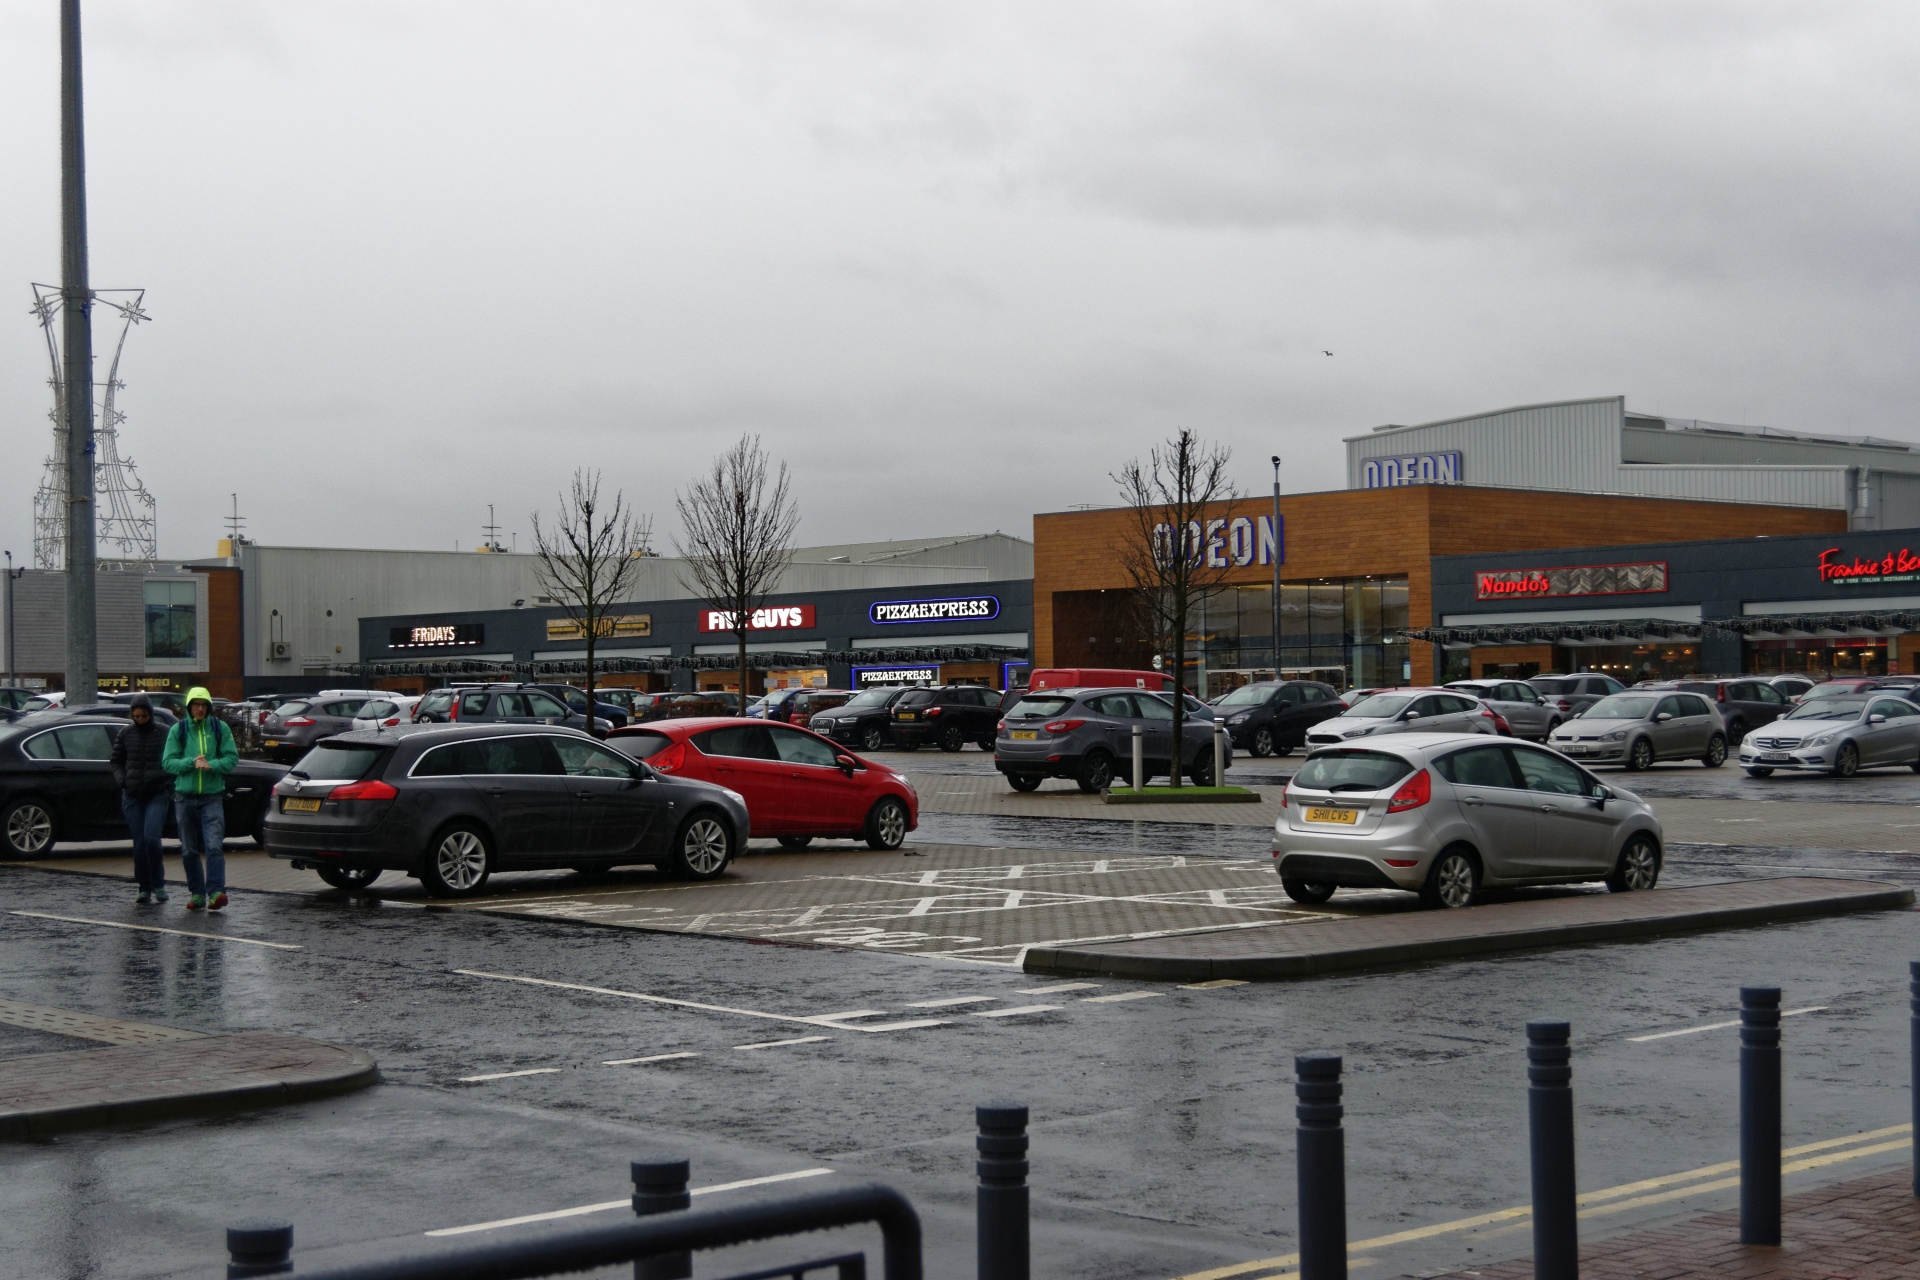 Car park on a miserable wet and rainy winters day